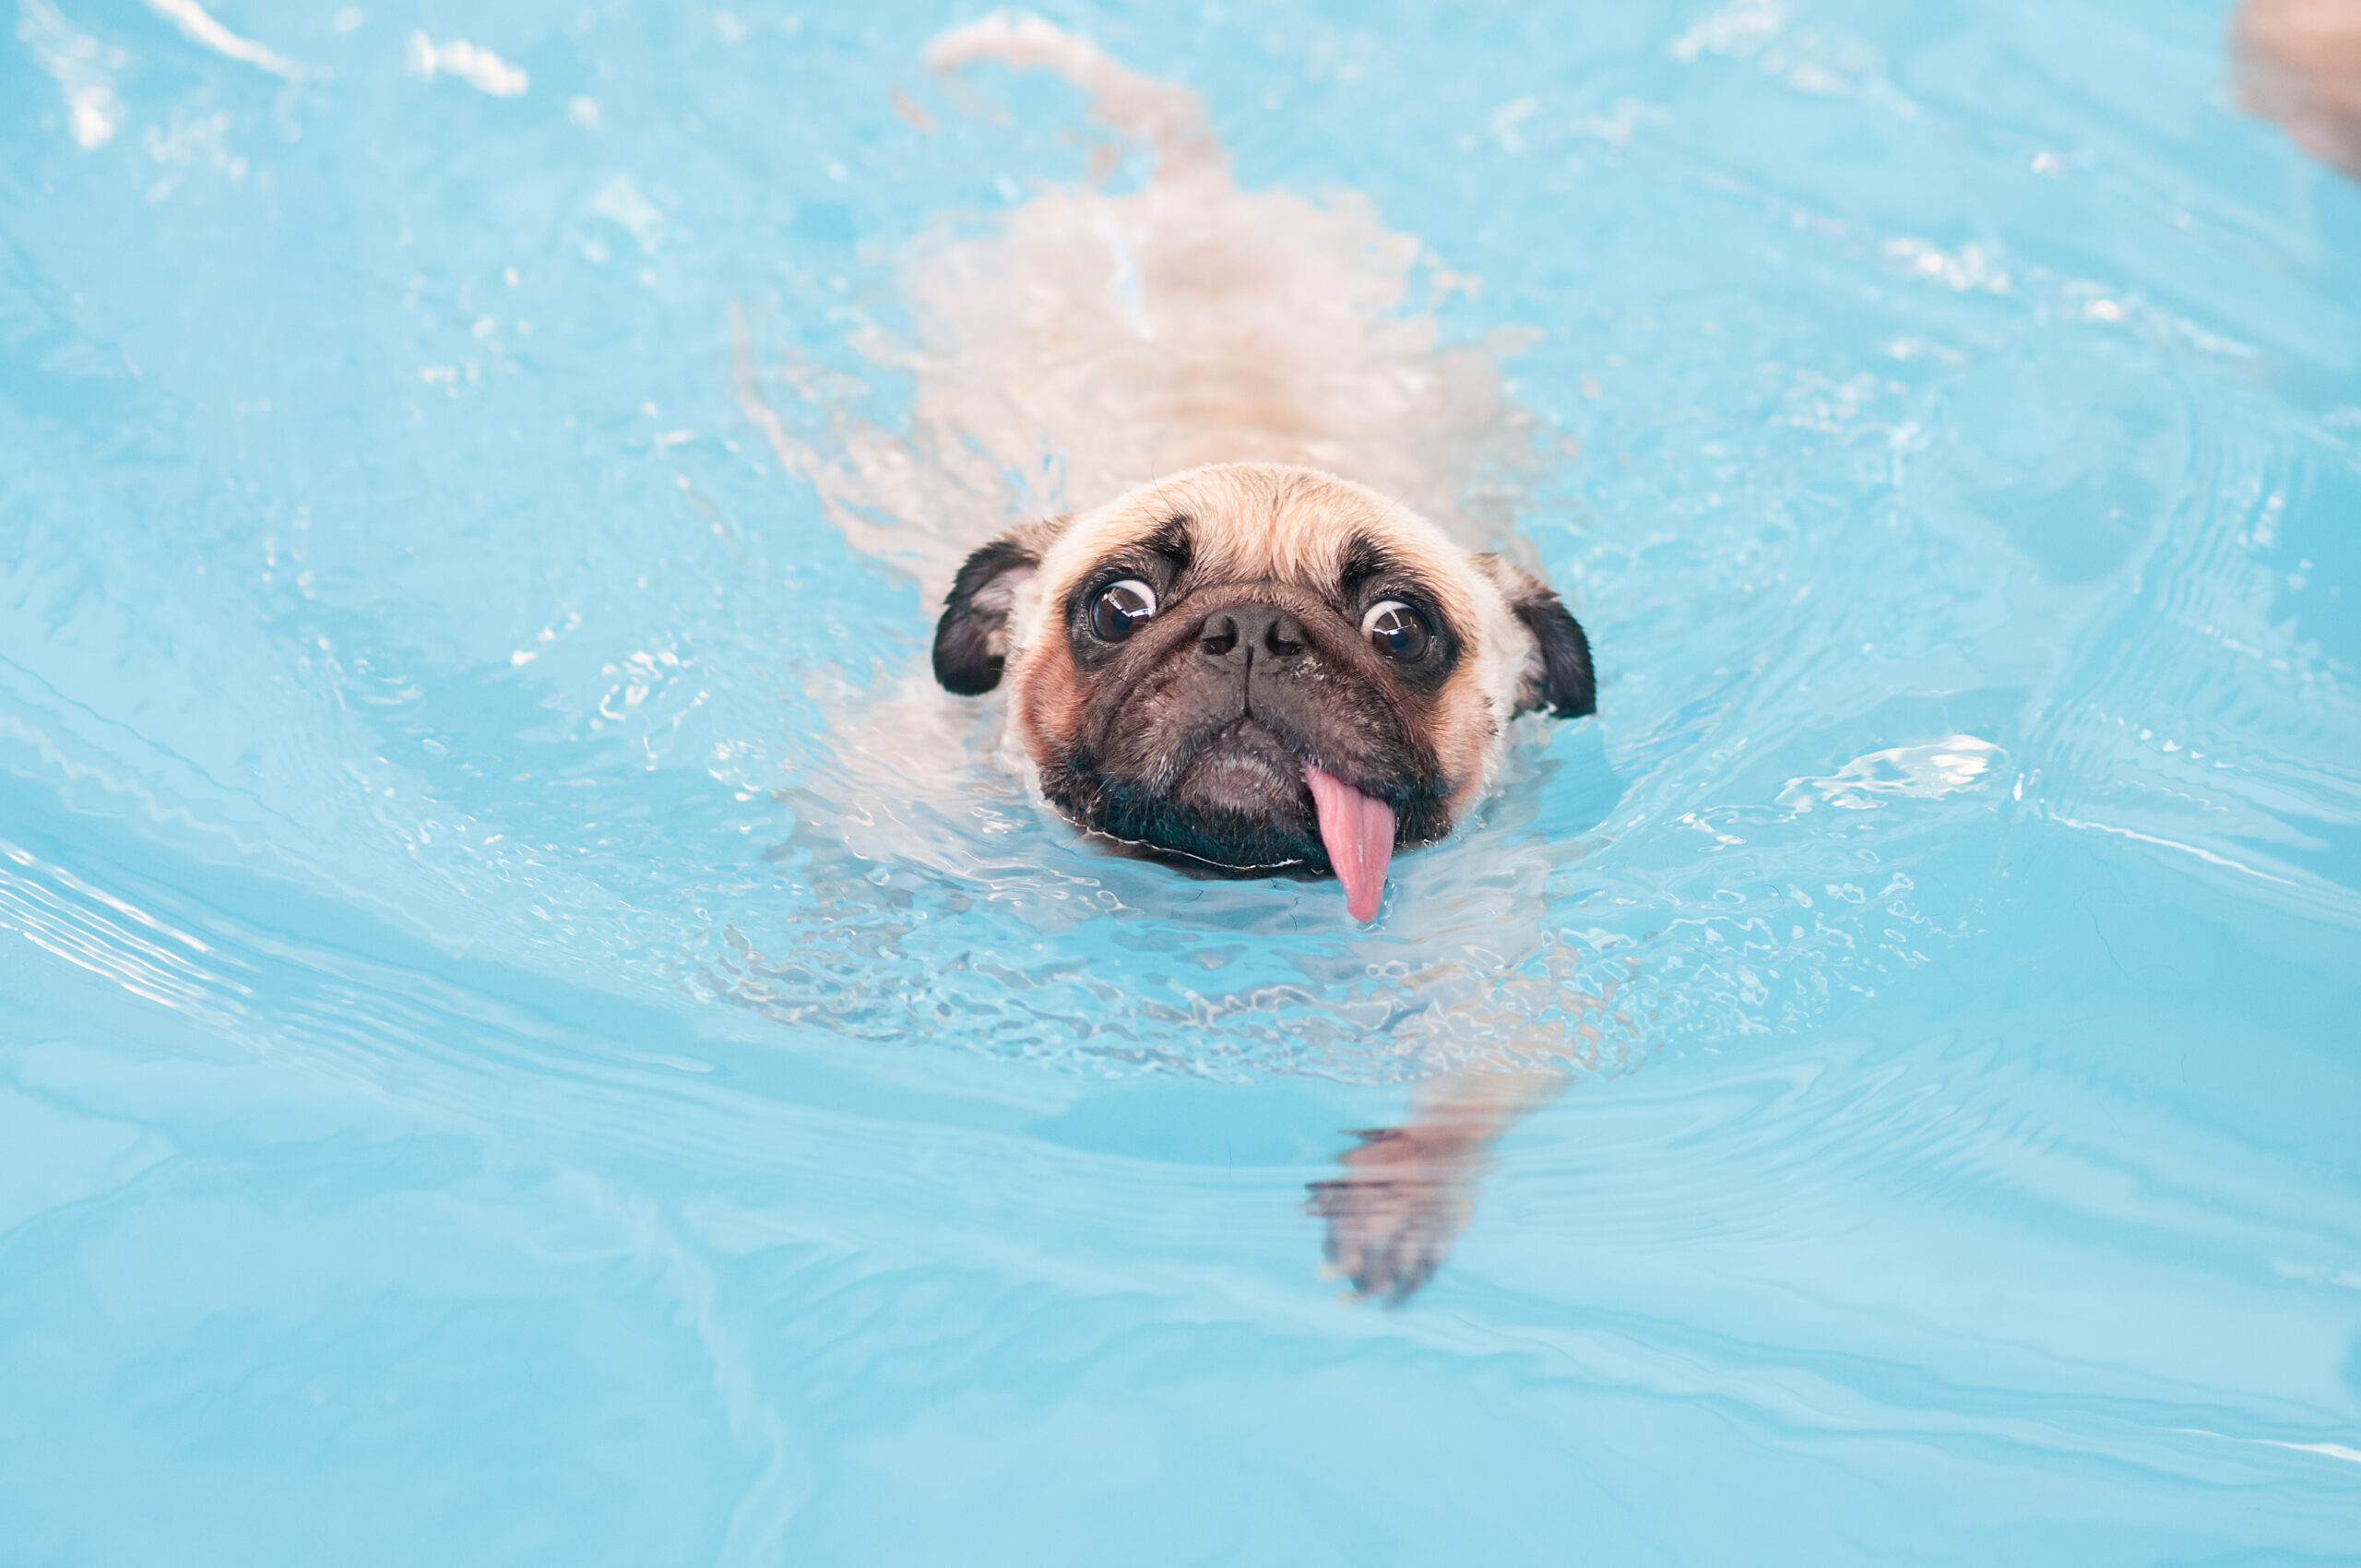 dog swimming in a pool - how to keep your dog safe while at the pool concept image